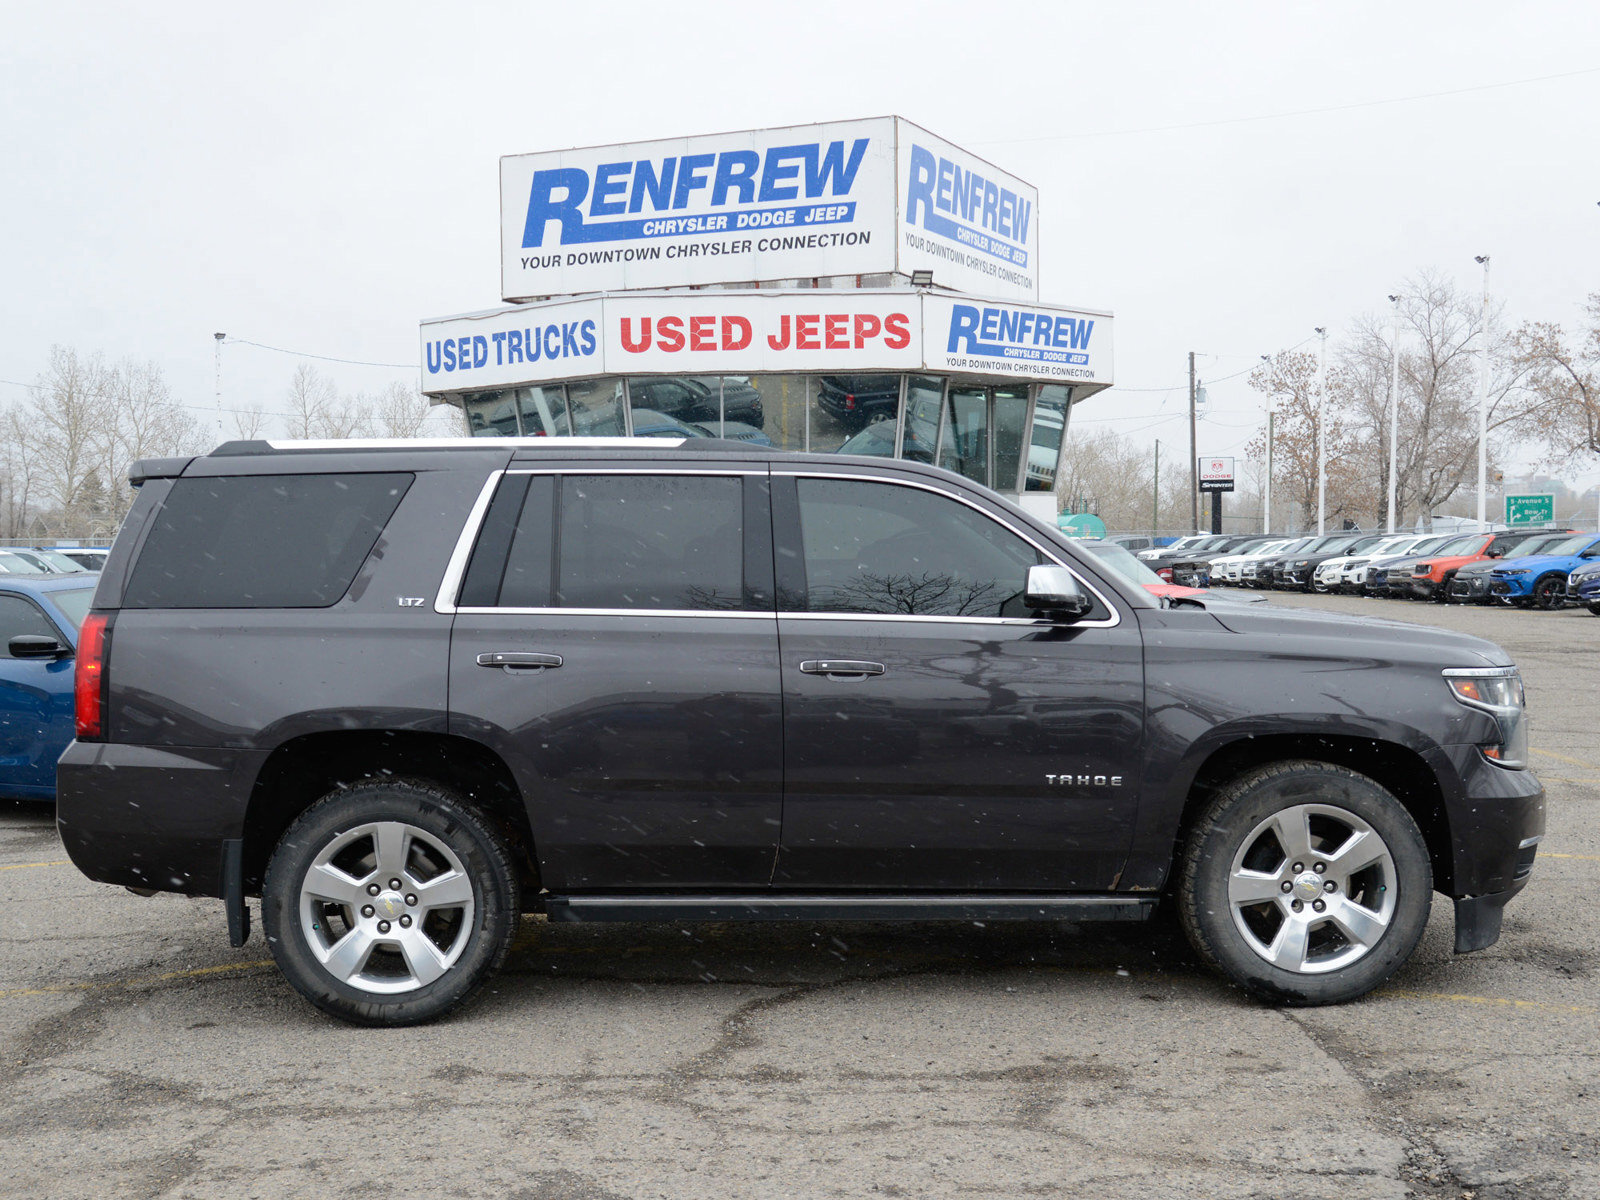 2015 Chevrolet Tahoe LTZ 4x4, Sunroof, Heated/Cooled Leather